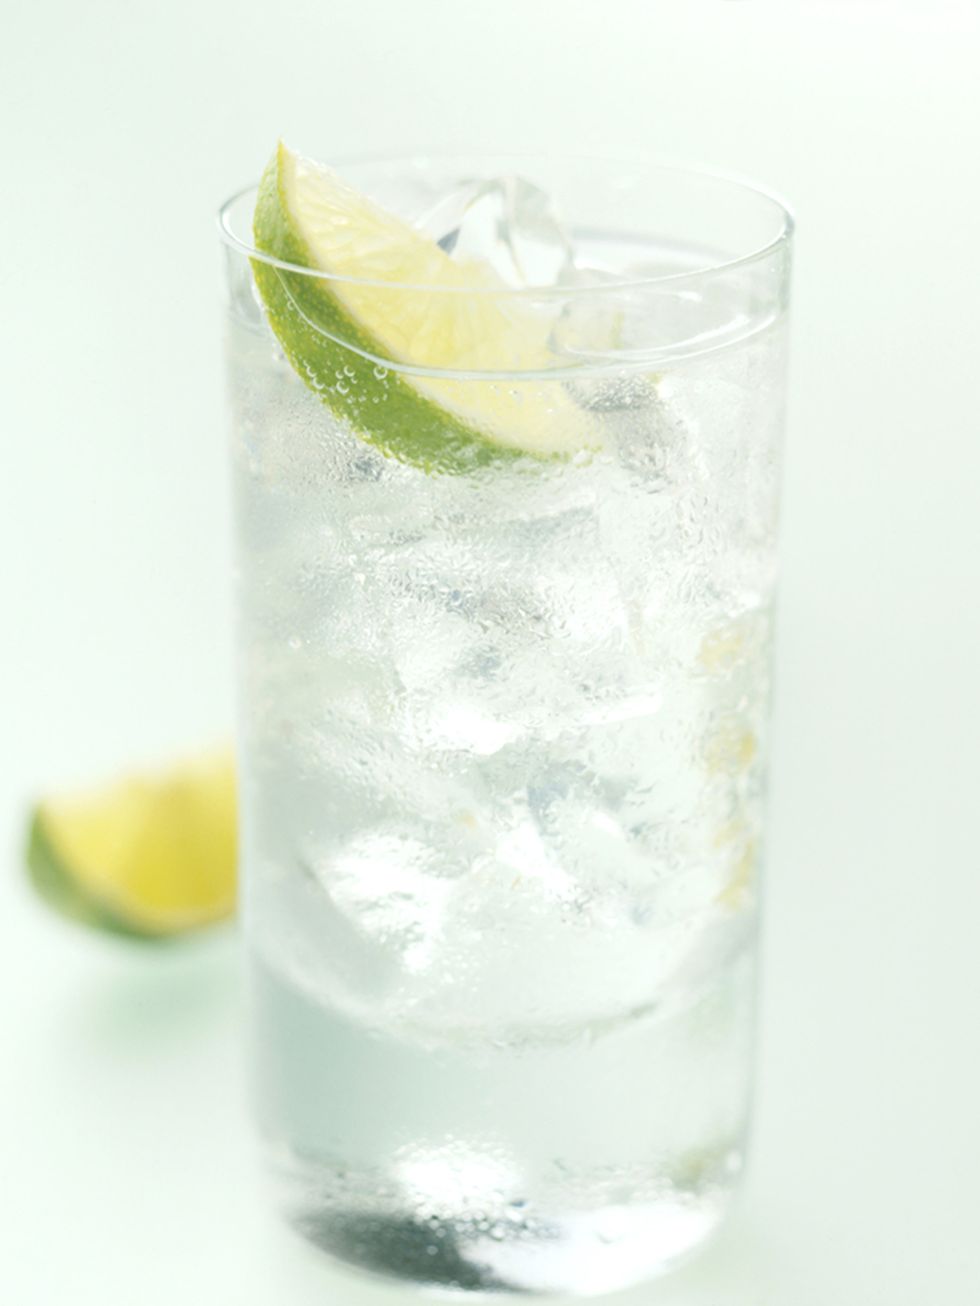 <p><strong>Where: Post-work drinks</strong></p>

<p>Vodka, soda, lime</p>

<p>A Vodka Rickey usually contains simple syrup, so make sure when you order this its made with pure lime this will ensure the calories are much lower.</p>

<p><strong>Vodka:</str